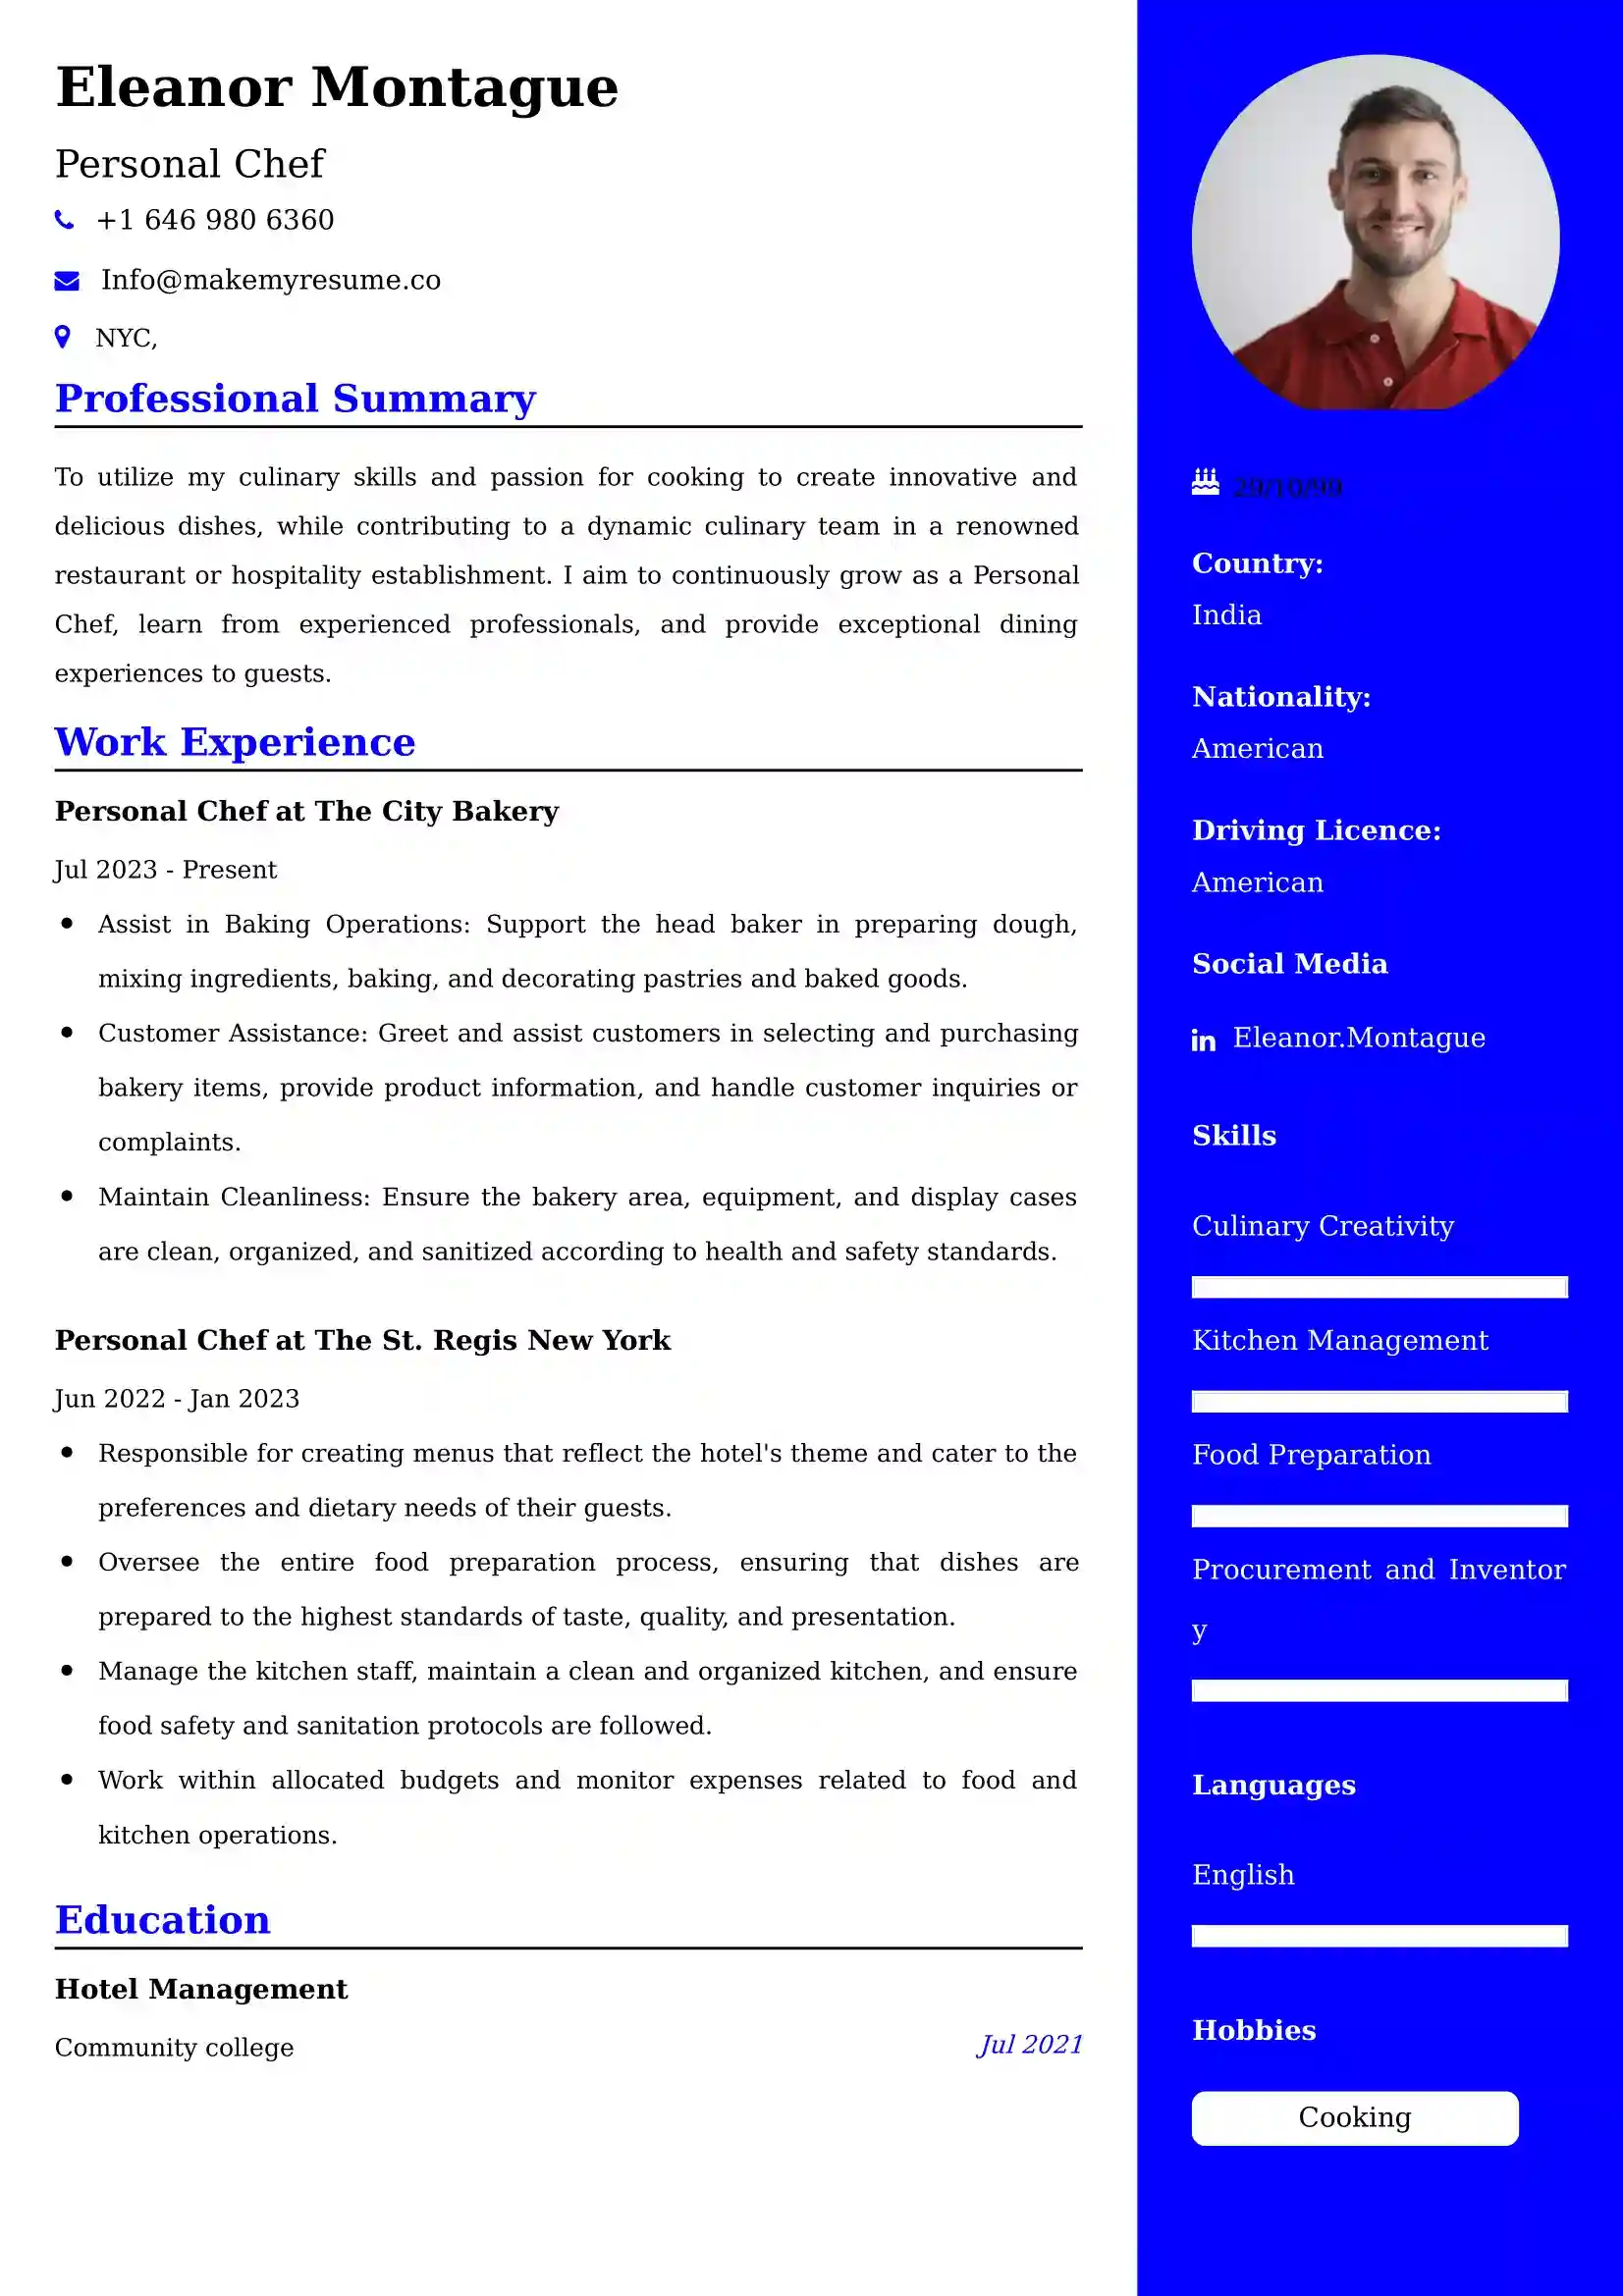 Personal Chef Resume Examples - UK Format, Latest Template.